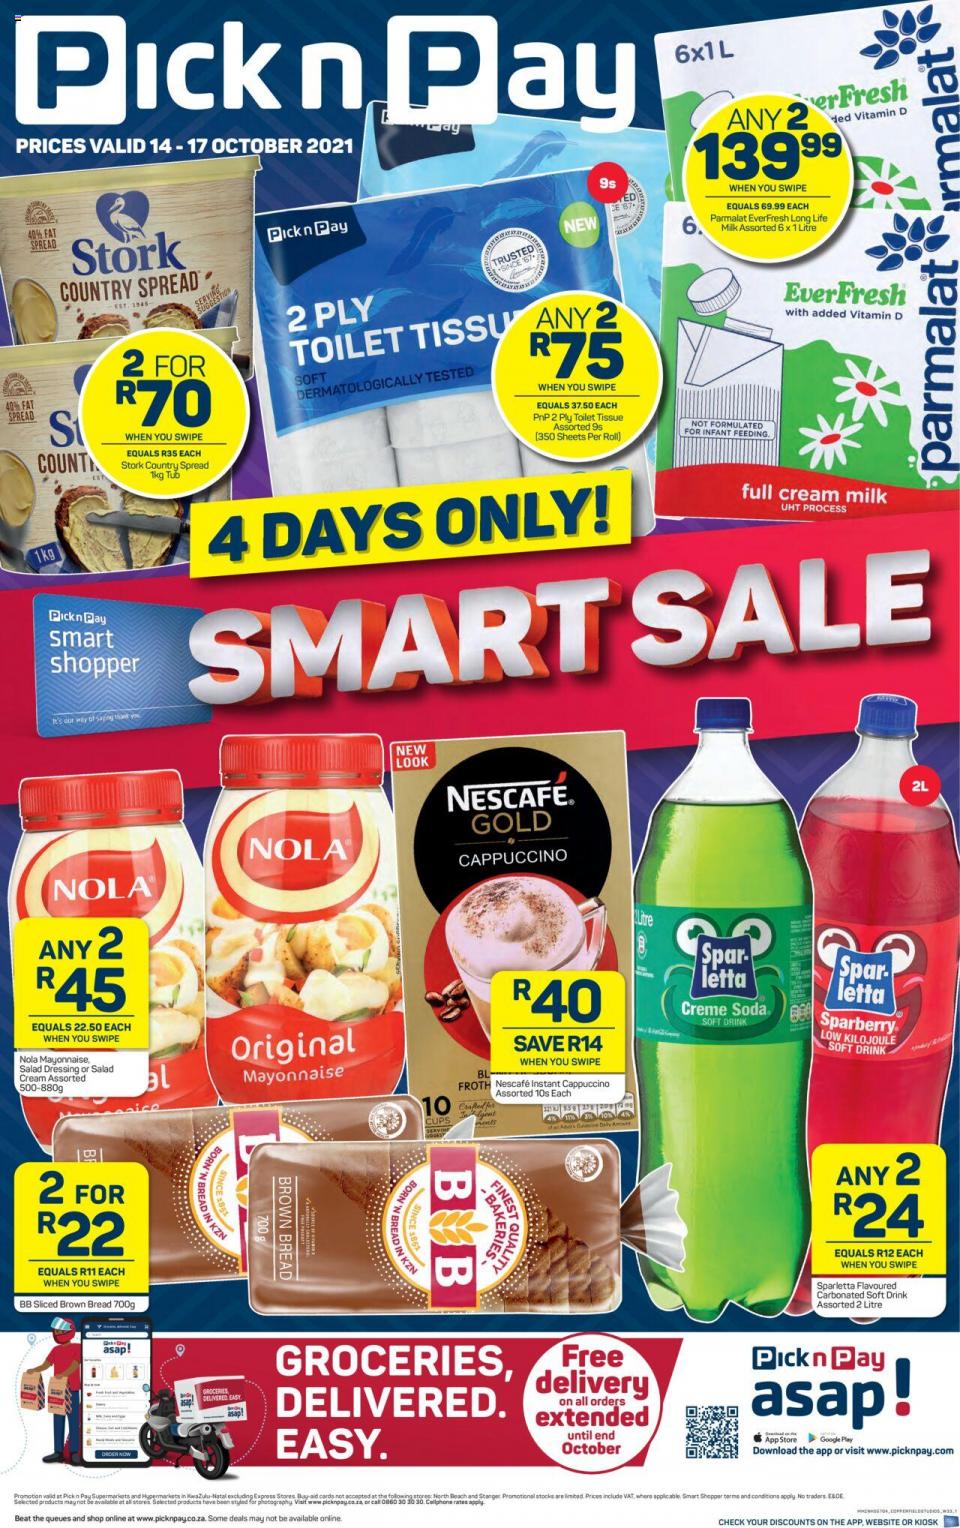 Pick n Pay Specials Weeked Deals 14 – 17 October 2021